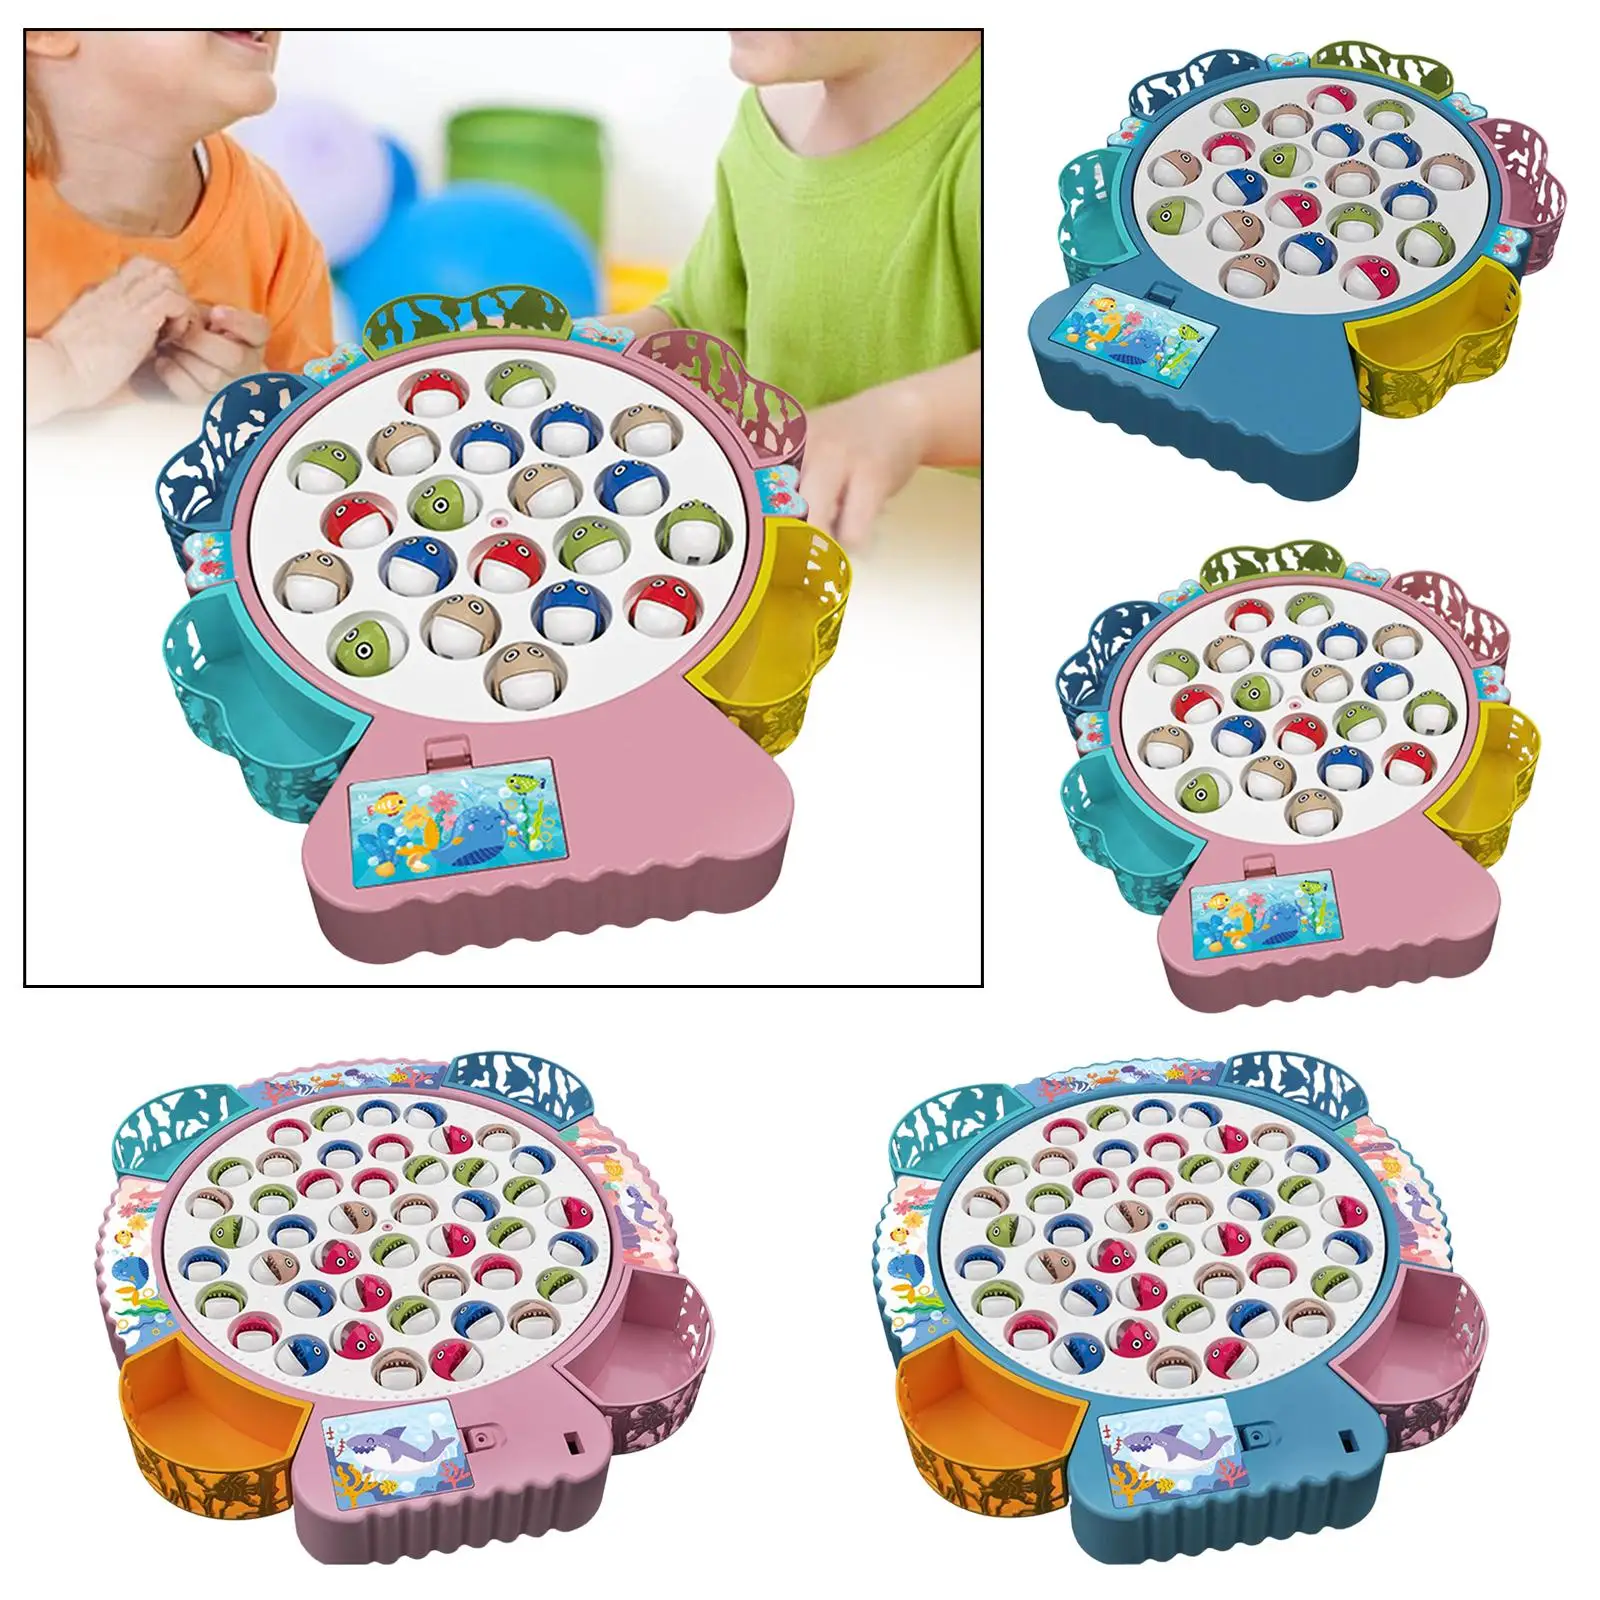 Fishing Game for 1-4 Player with 4 Fishing Poles Fine Motor Skills Electric Fishing Toy with Music for Preschool Age 3 and up